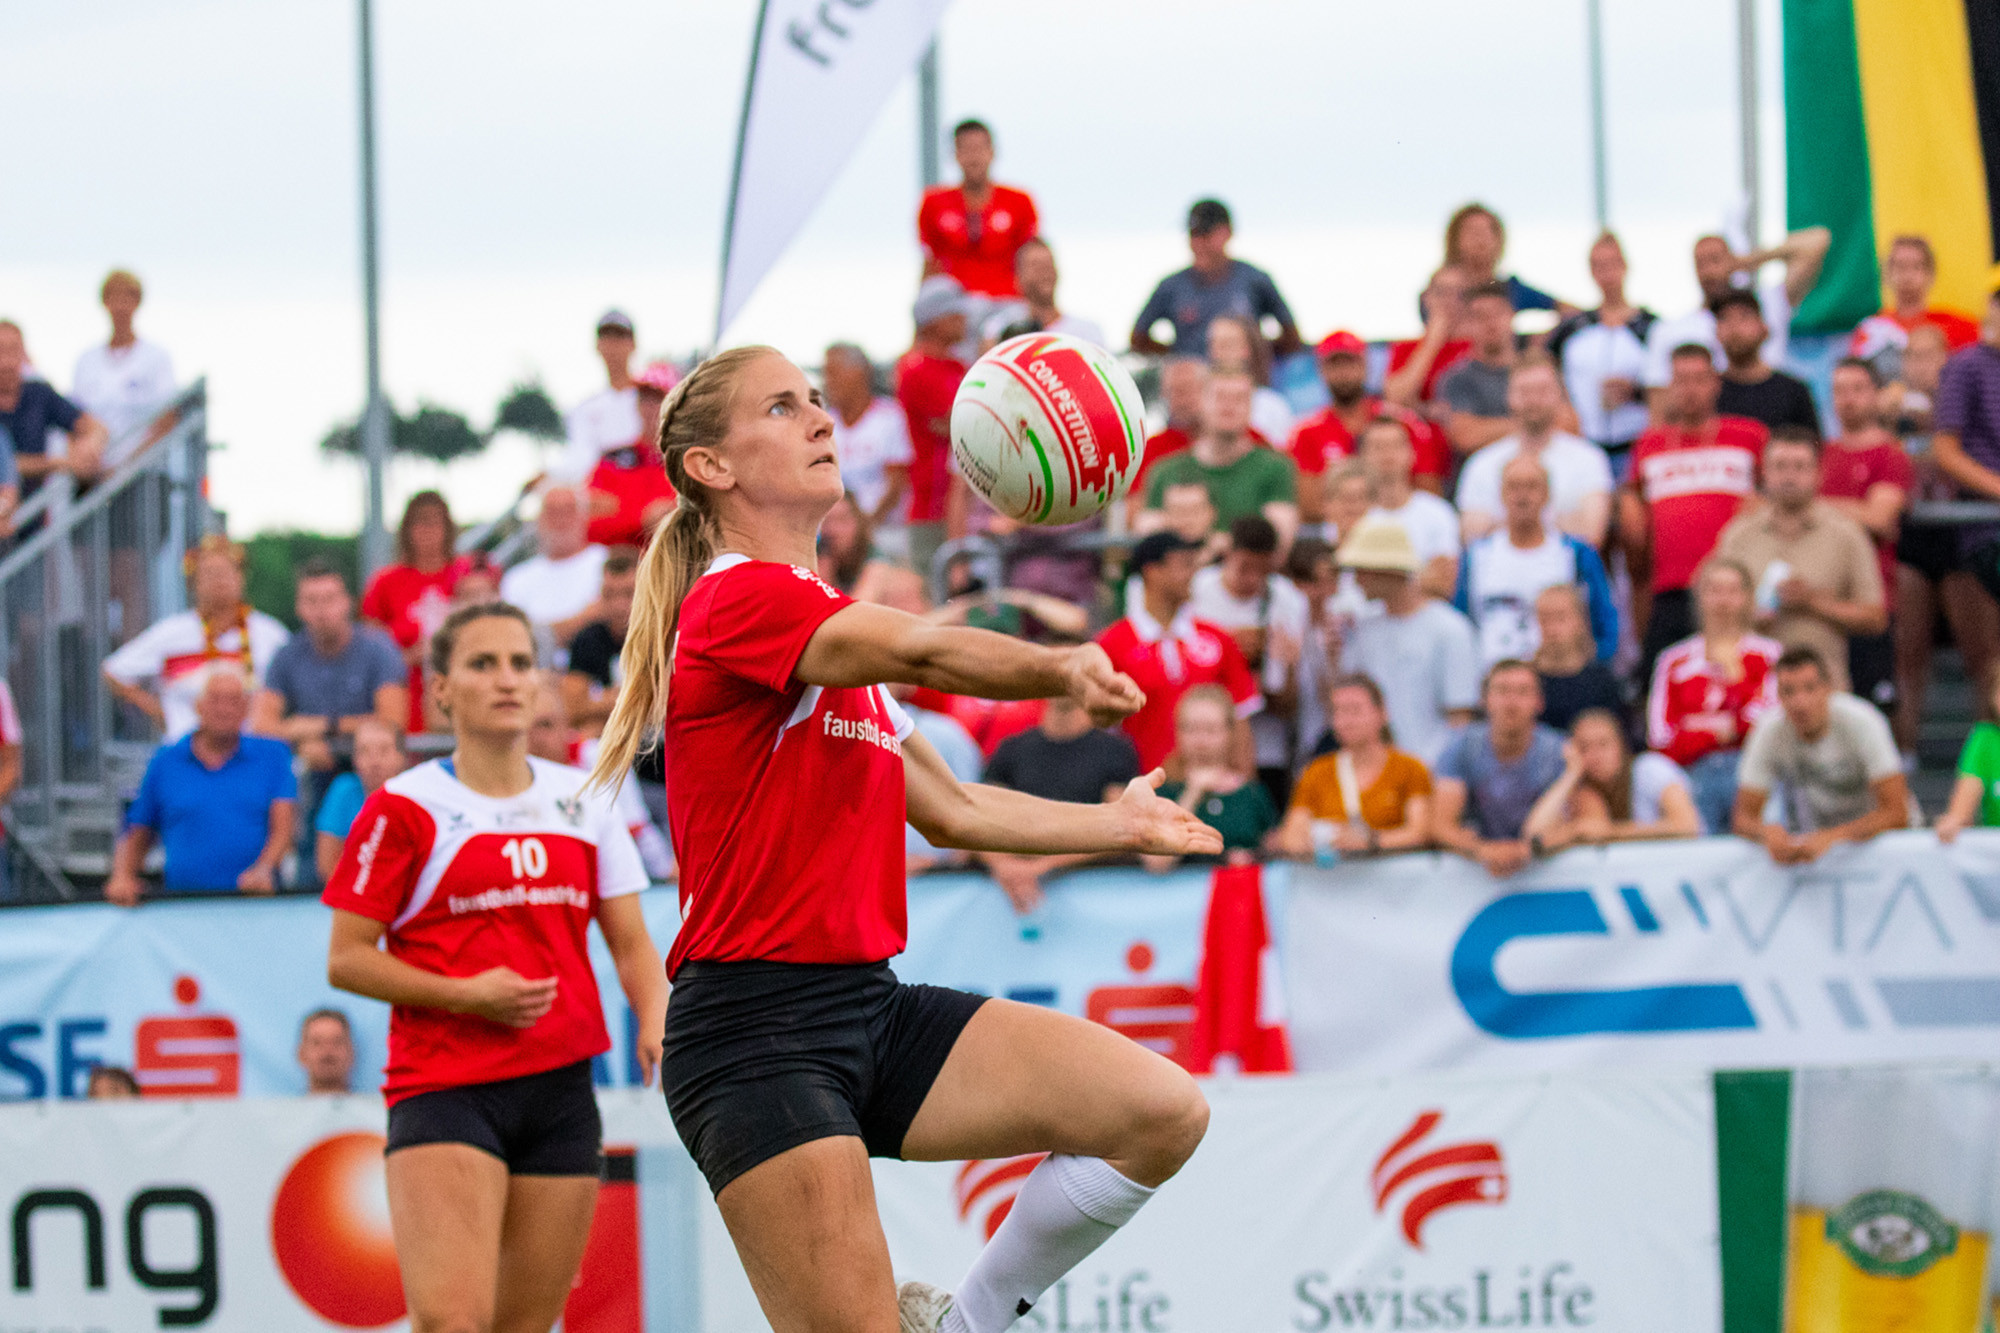 Austria's Teresa Pichler in action for the hosts against Germany in the Women's Fistball World Championship final ©IFA